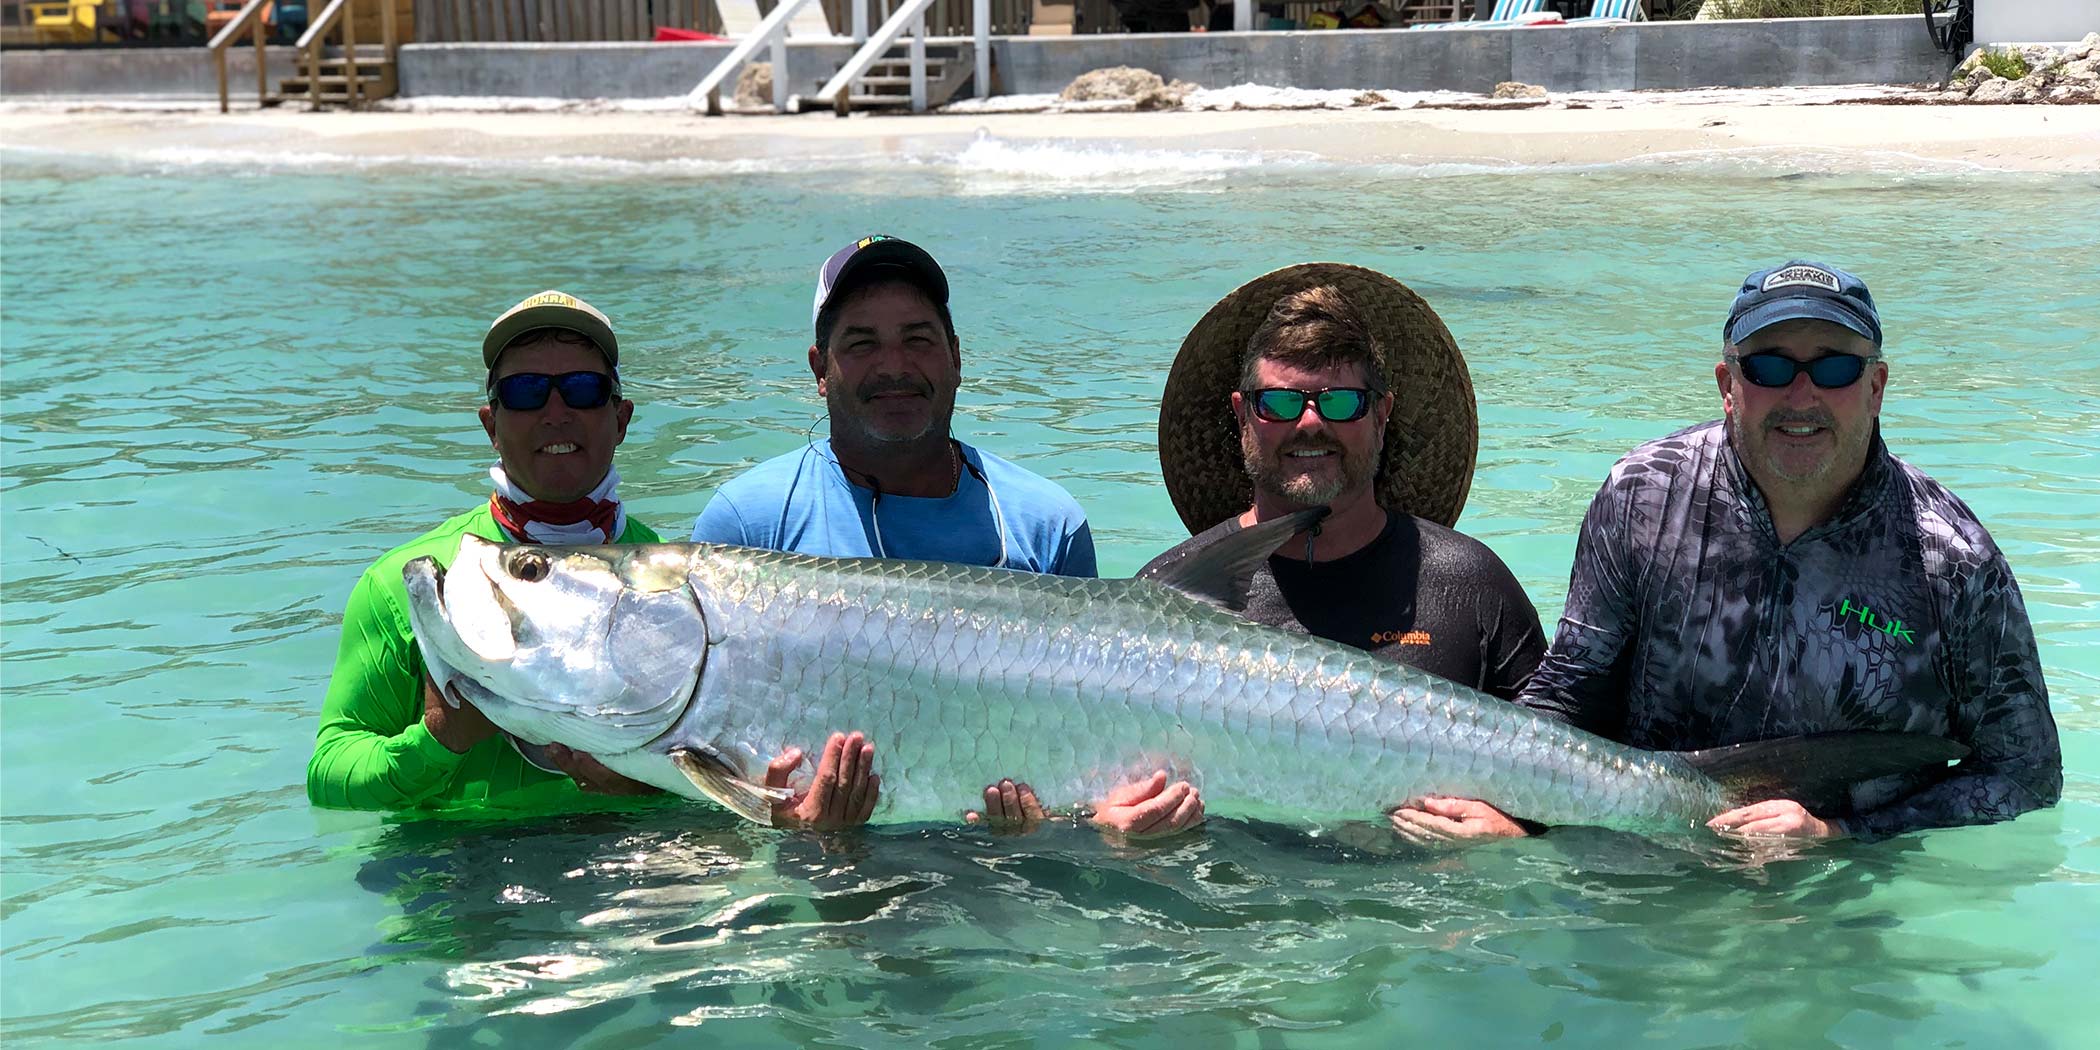 These guys had a great charter, capped off with landing this big tarpon.